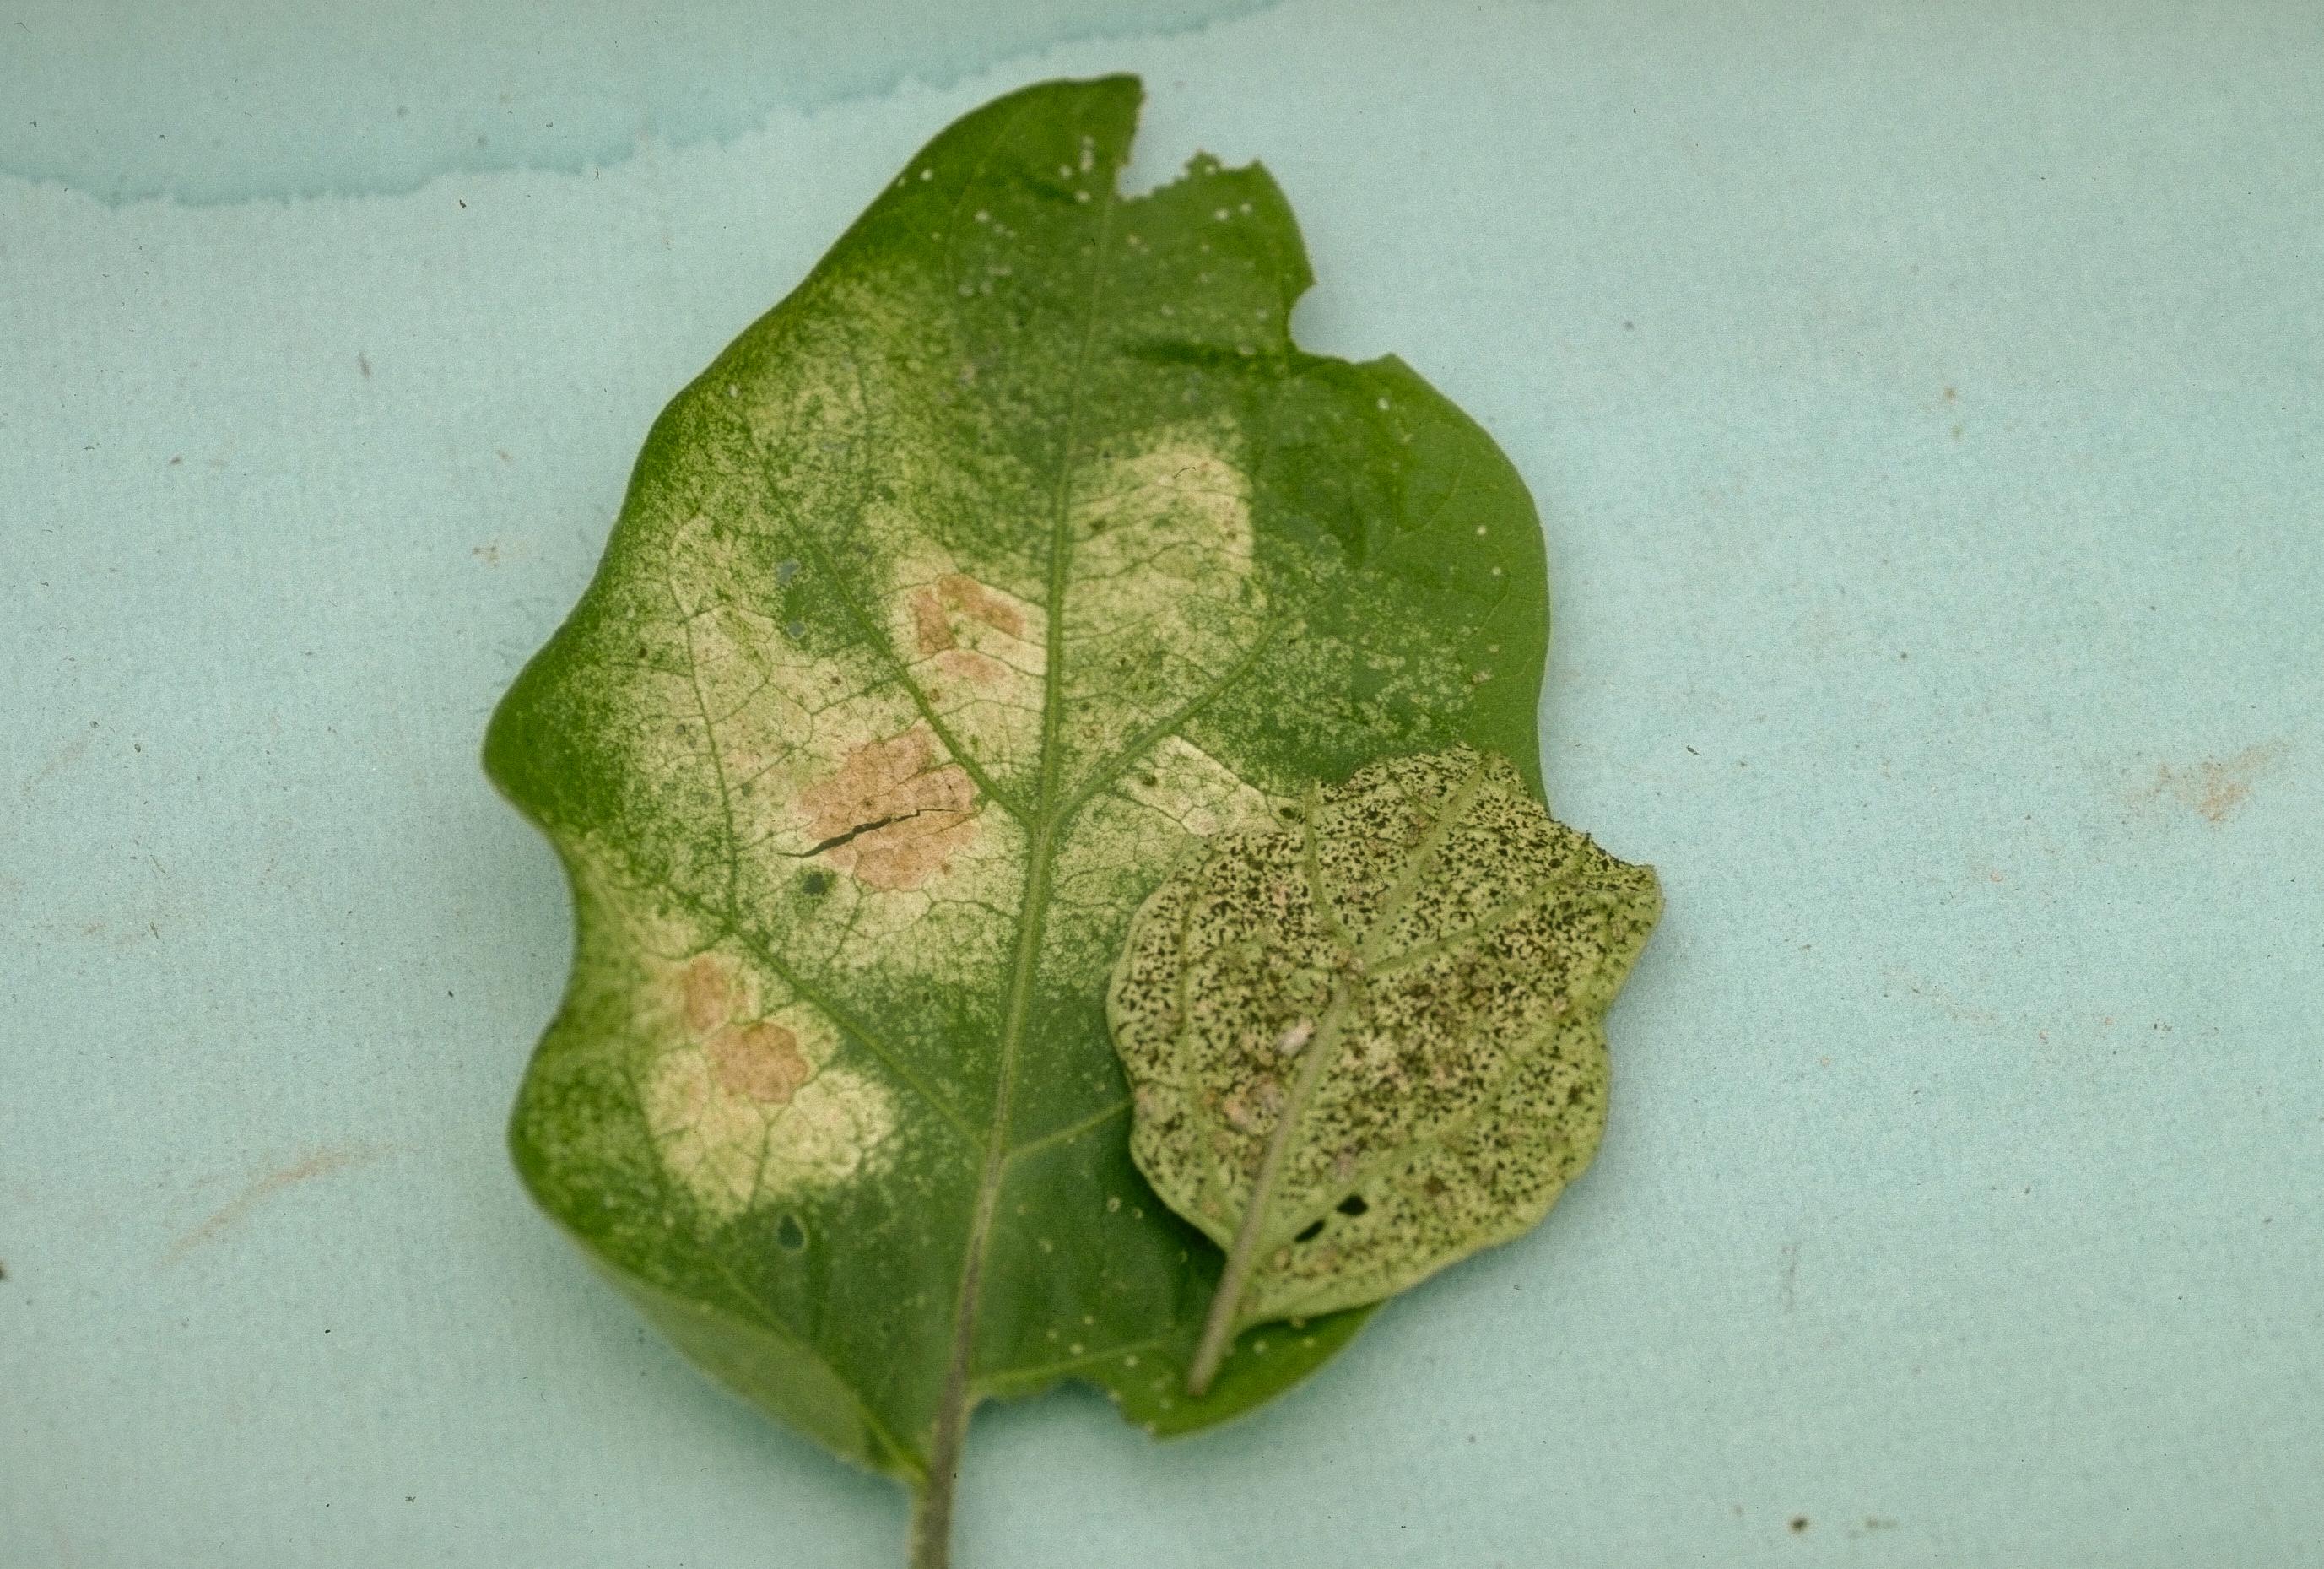 Eggplant lace bug damage and signs of the insects on the underside of a leaf